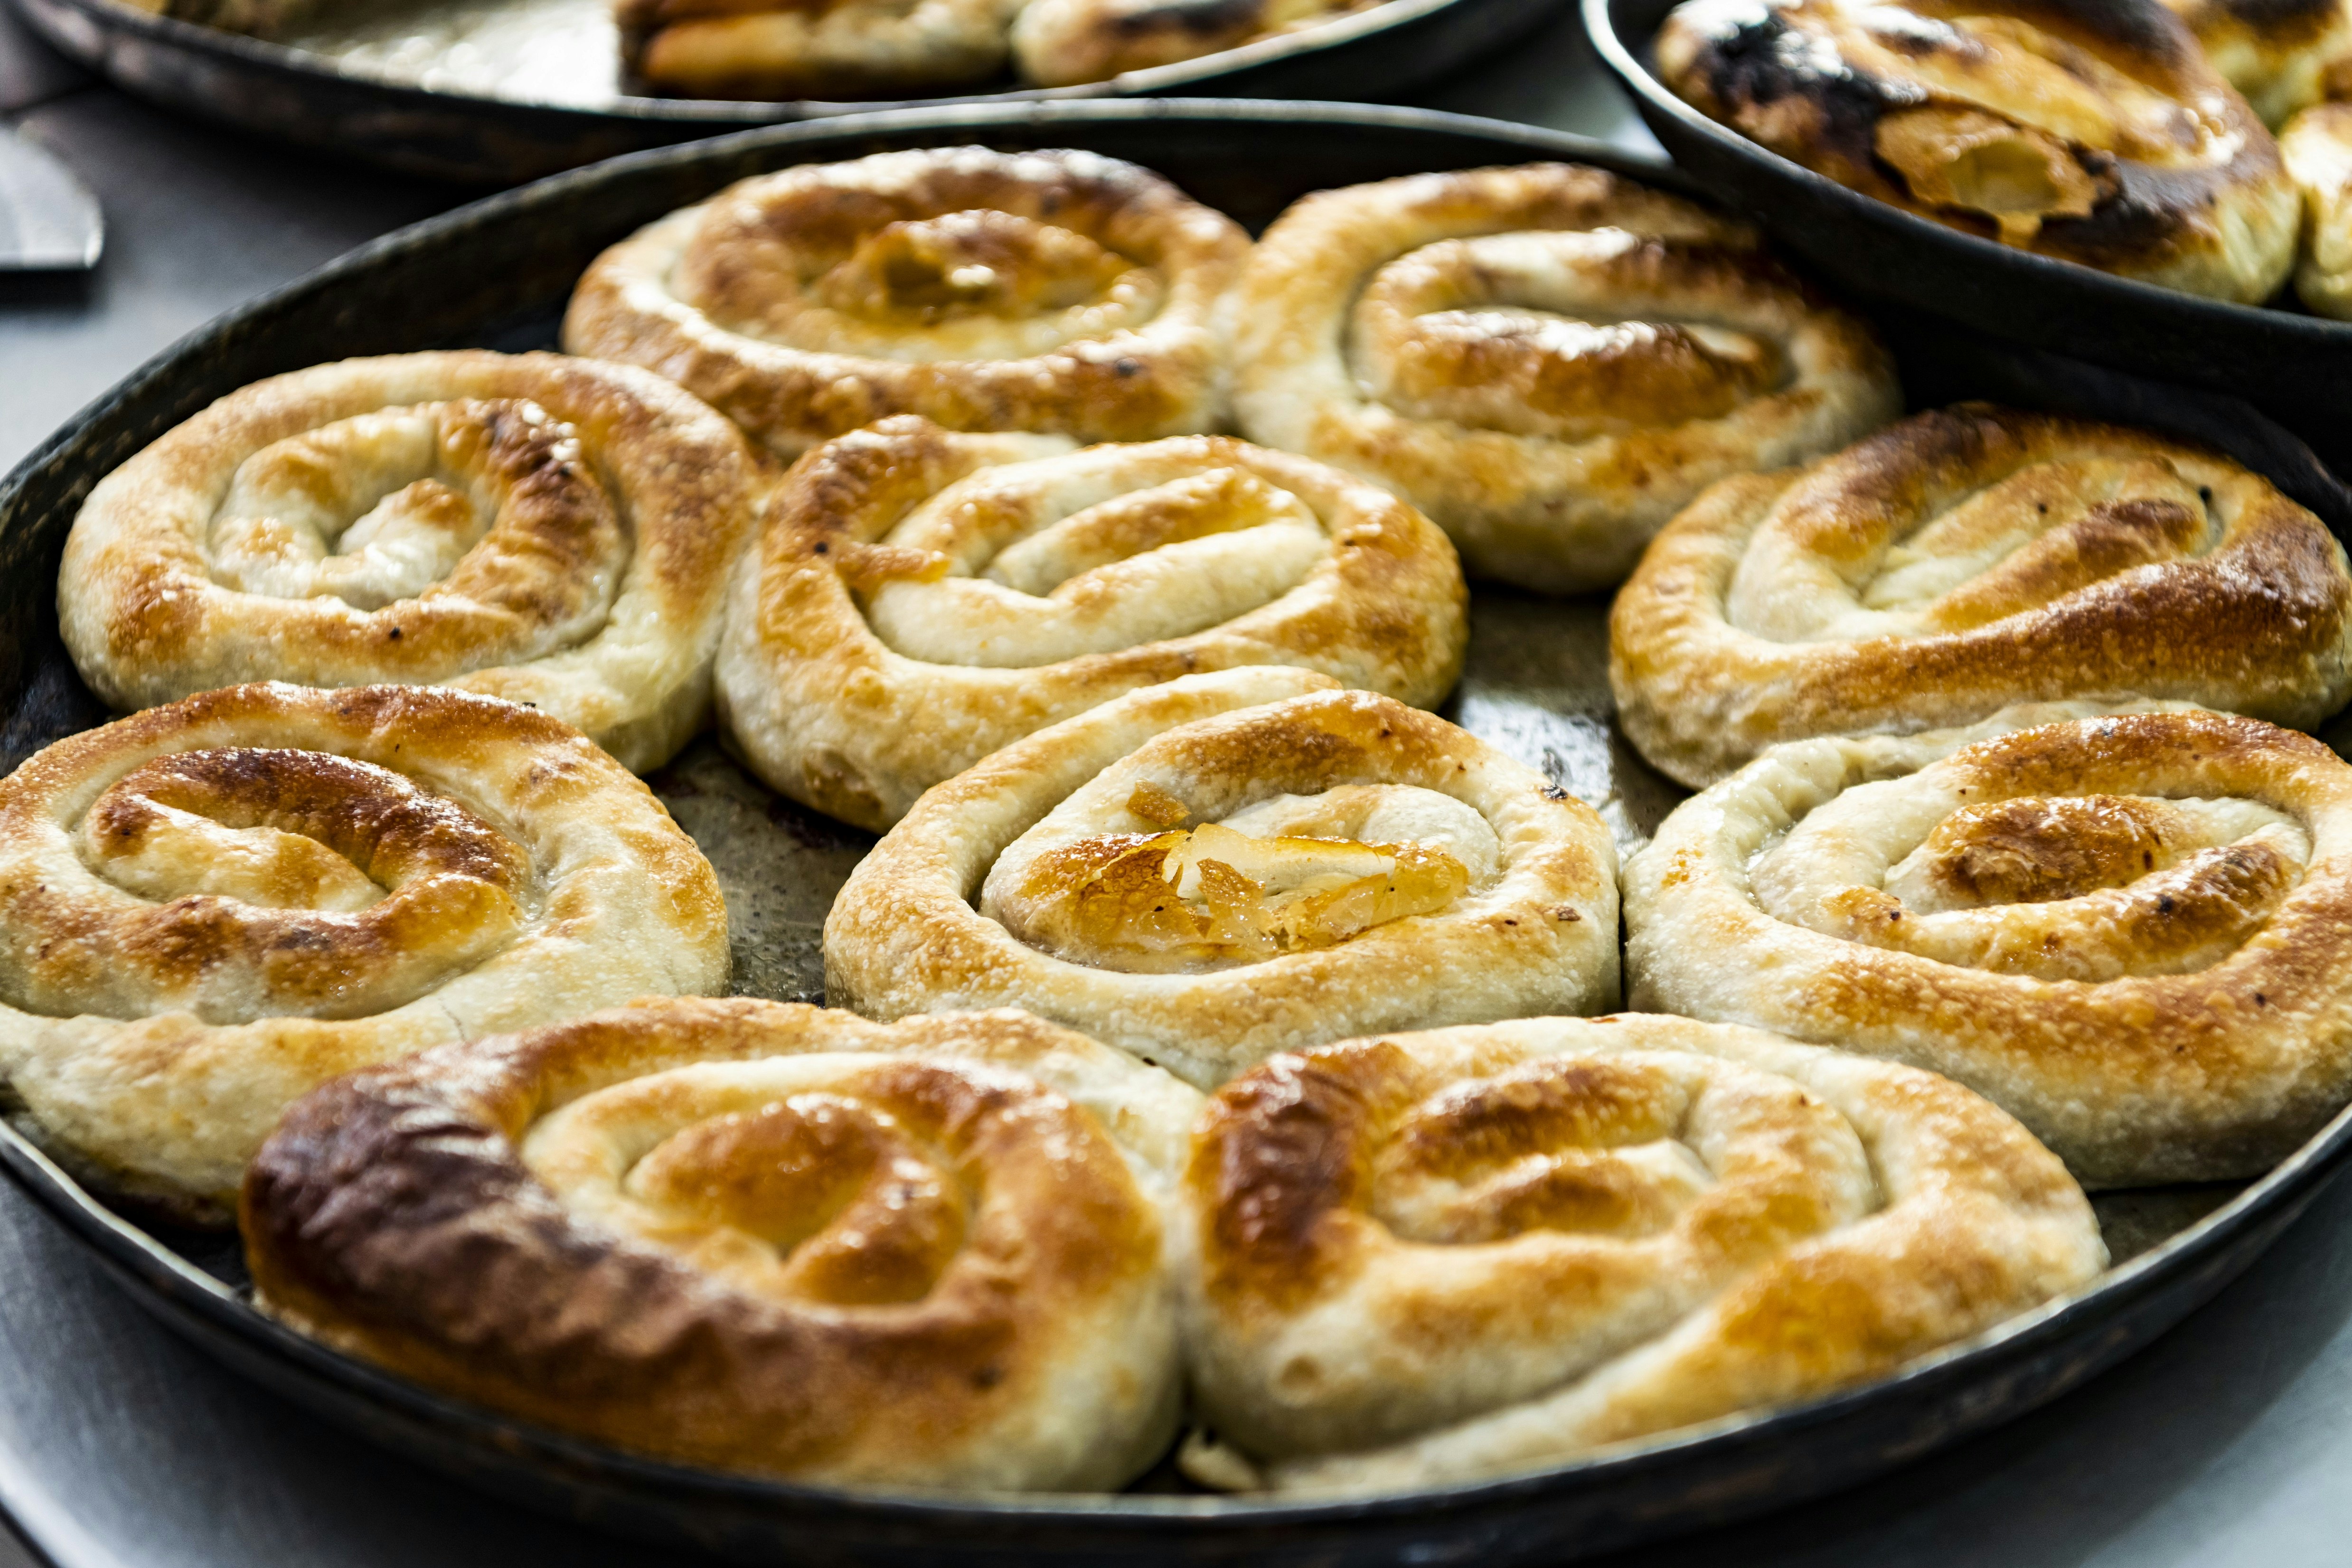 A dozen burek pies cooling on a large black plate. The pies are spirals resembling a snail shell, made from pastry and containing various ingredients like meat and vegetables.